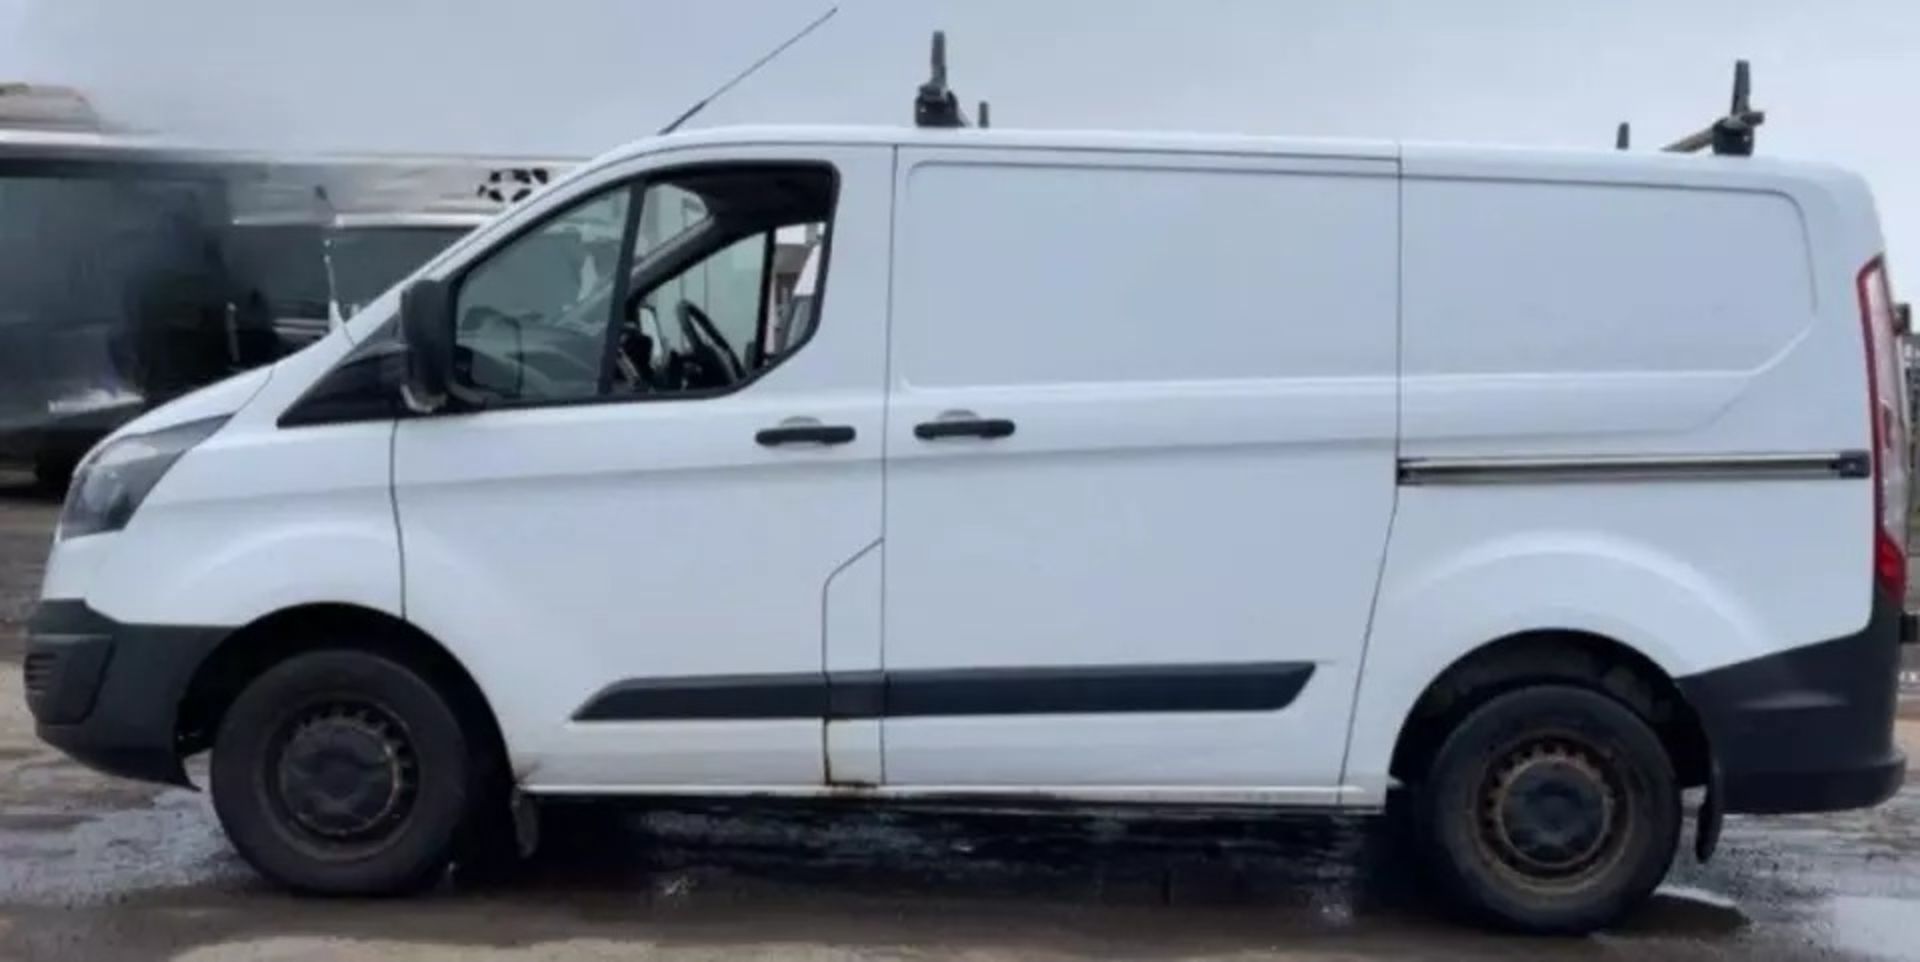 2015 FORD TRANSIT CUSTOM PANEL VAN - RELIABLE, WELL-MAINTAINED, AND READY FOR WORK - Image 3 of 12